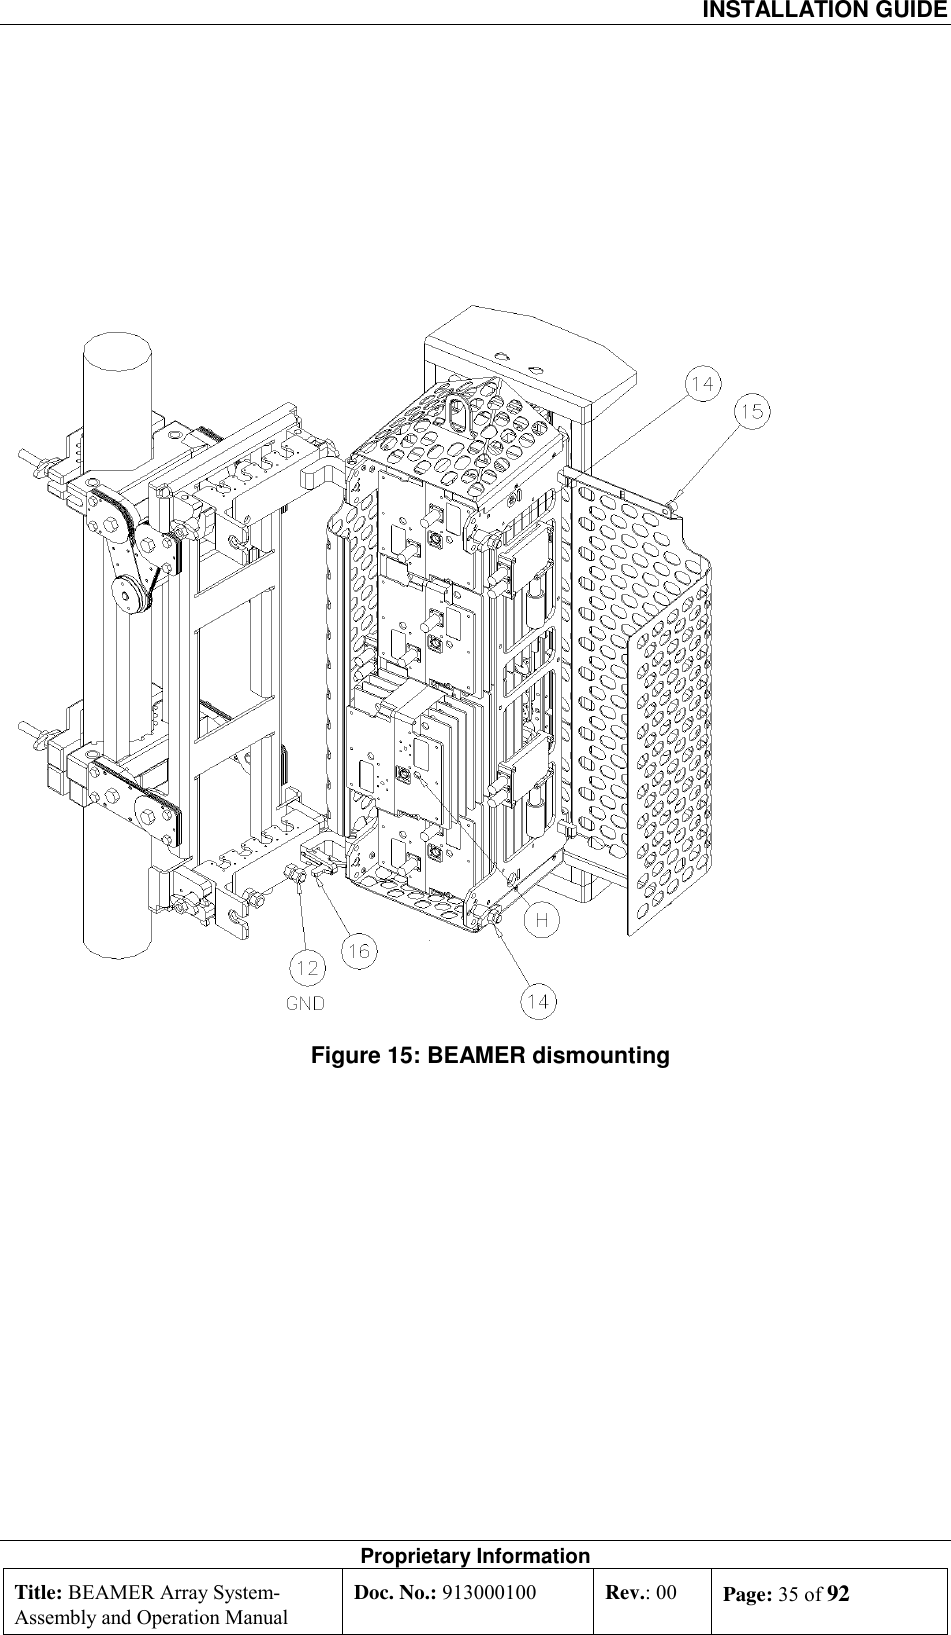  INSTALLATION GUIDE Proprietary Information Title: BEAMER Array System- Assembly and Operation Manual Doc. No.: 913000100  Rev.: 00  Page: 35 of 92     Figure 15: BEAMER dismounting 